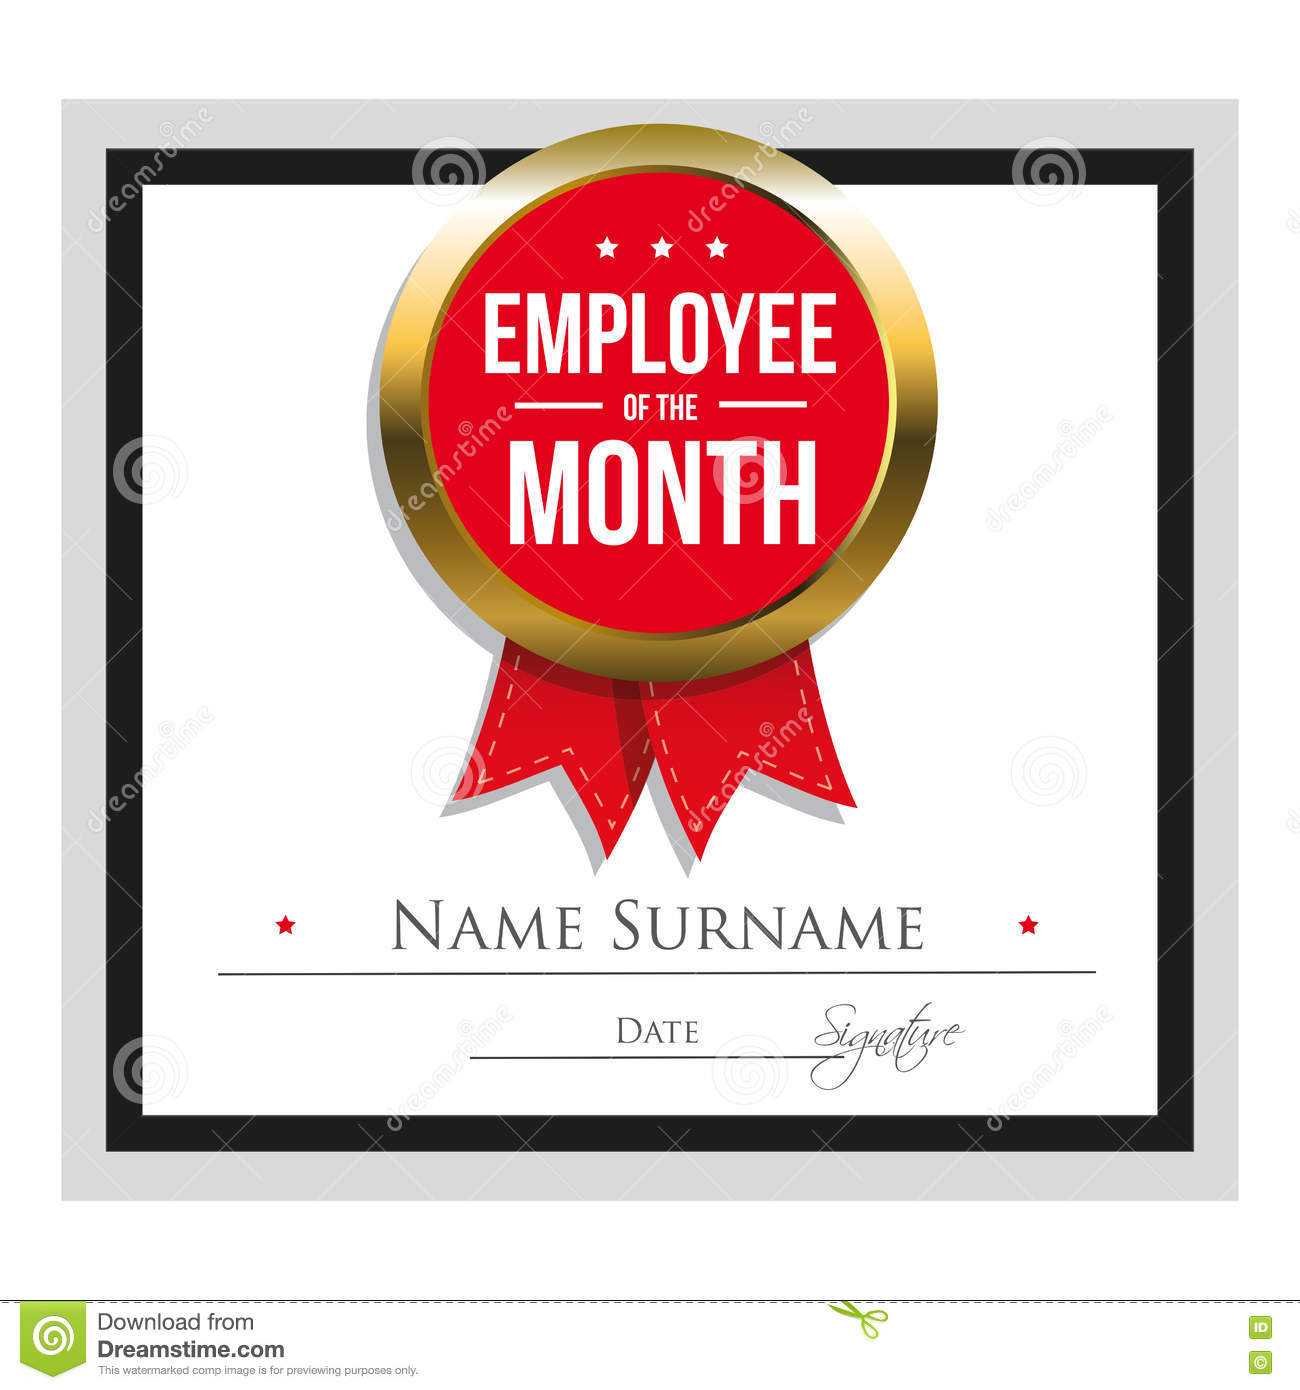 Employee Of The Month Certificate Template Stock Vector Within Best Employee Award Certificate Templates